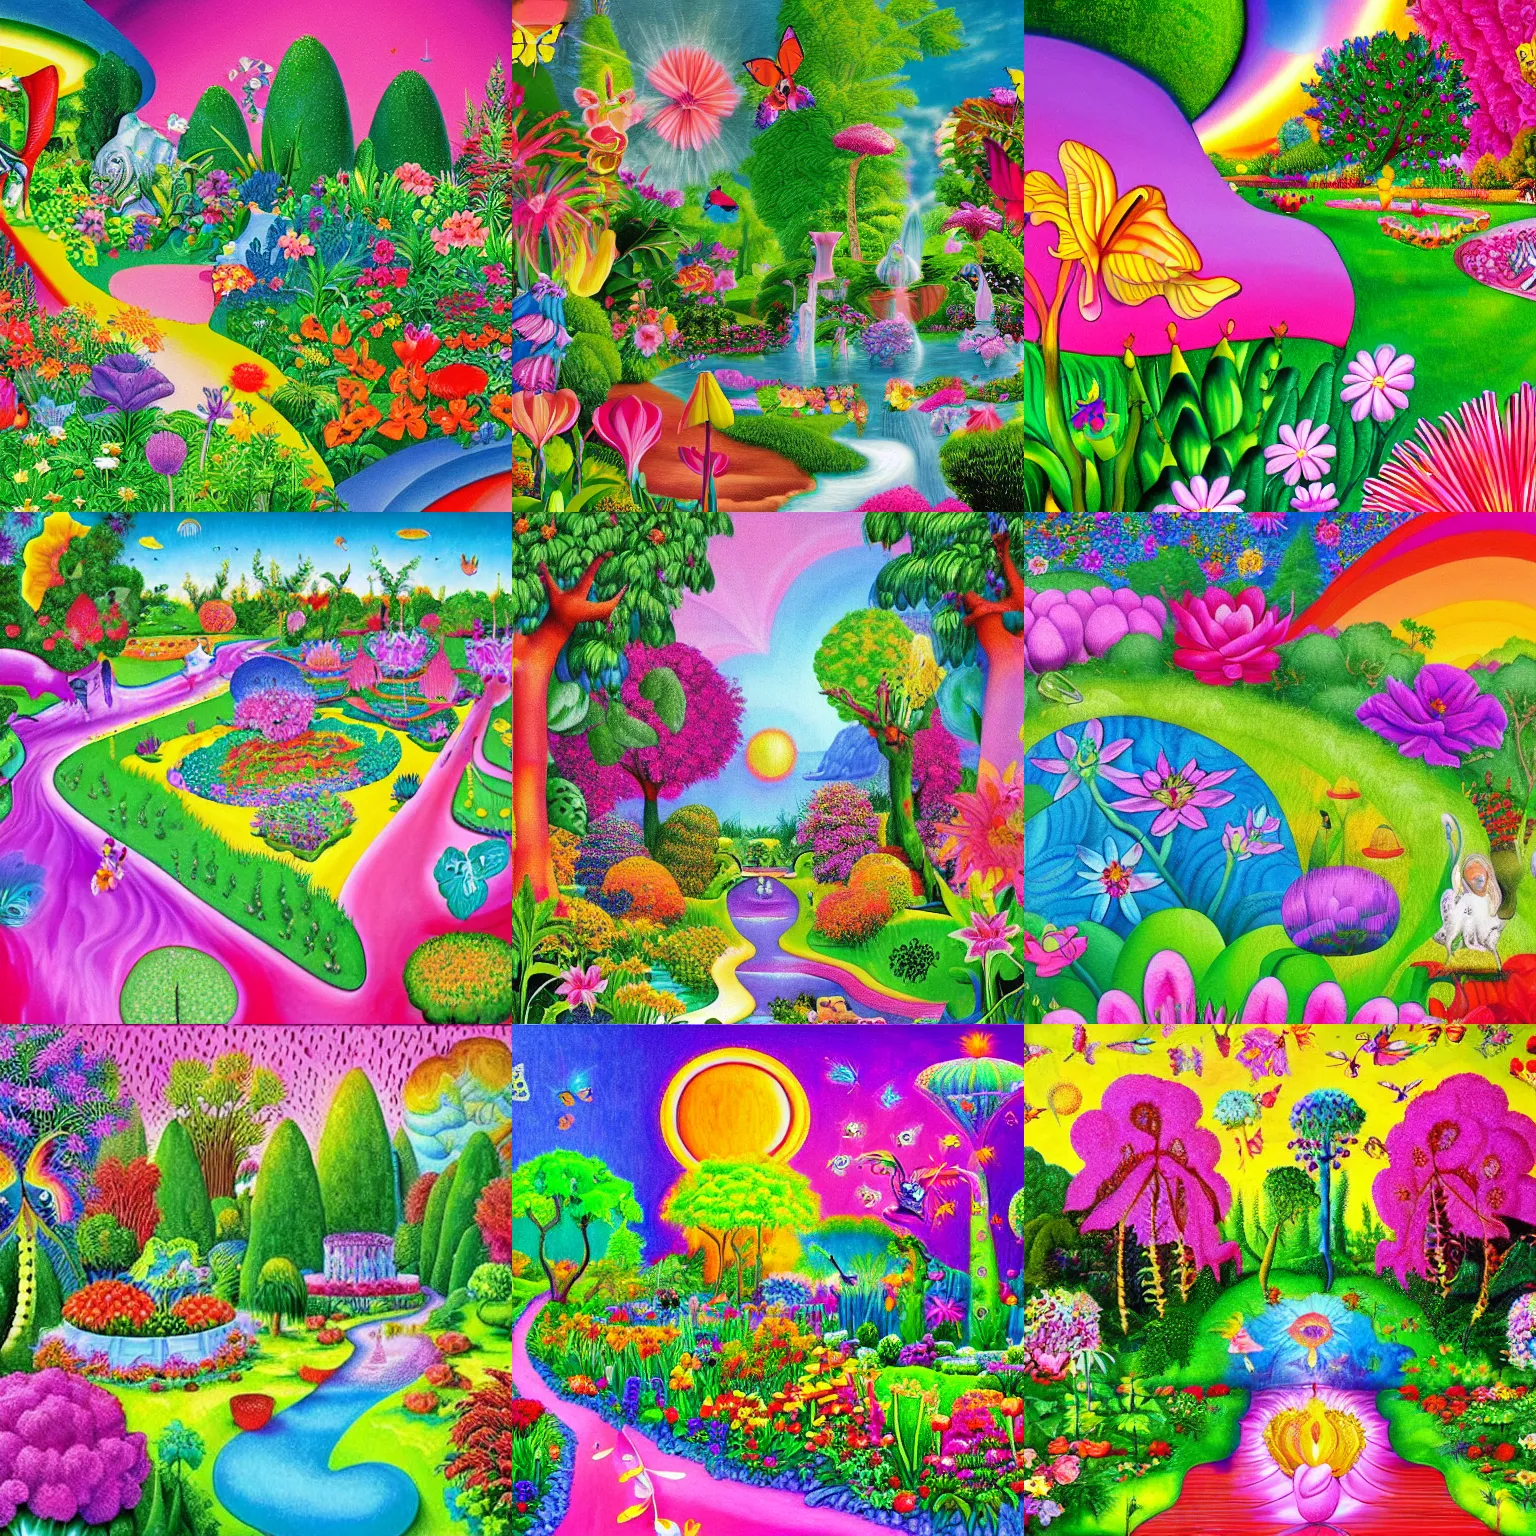 Prompt: bosch and lisa frank painting of a magnificent garden